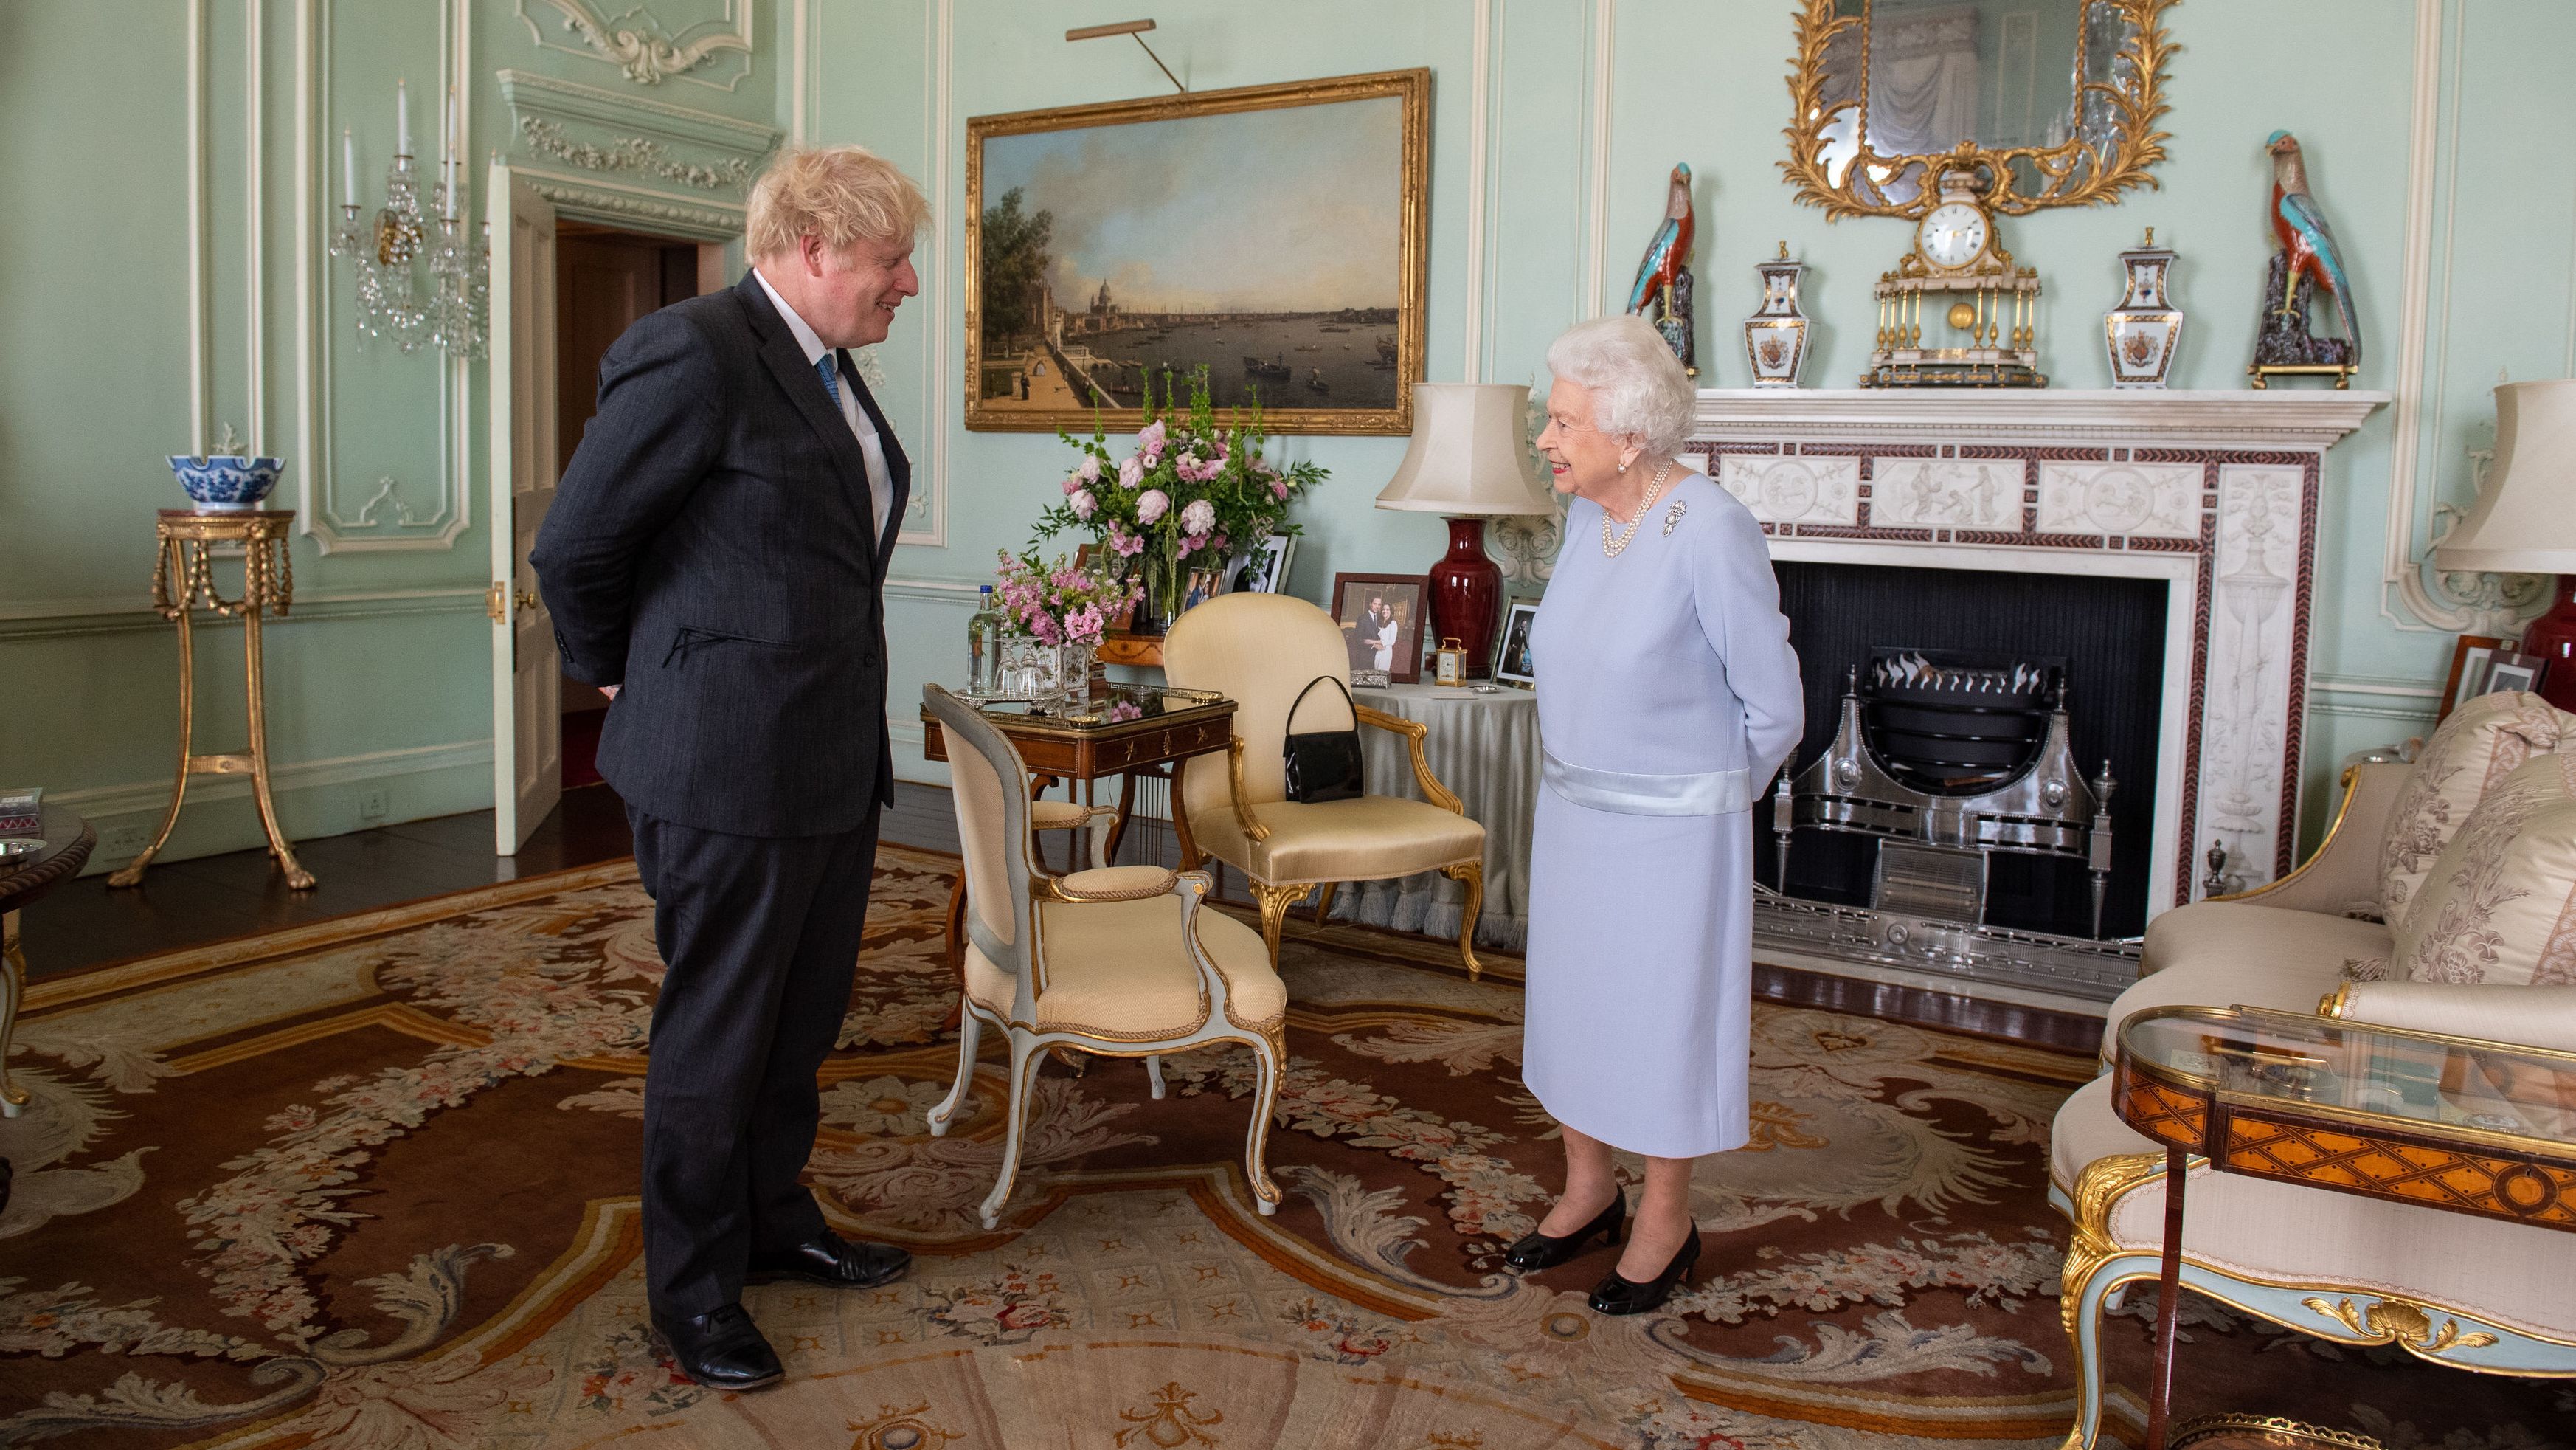 Queen Elizabeth II greets Johnson at Buckingham Palace in June 2021. It was the Queen's first in-person weekly audience with the Prime Minister since the start of the coronavirus pandemic.